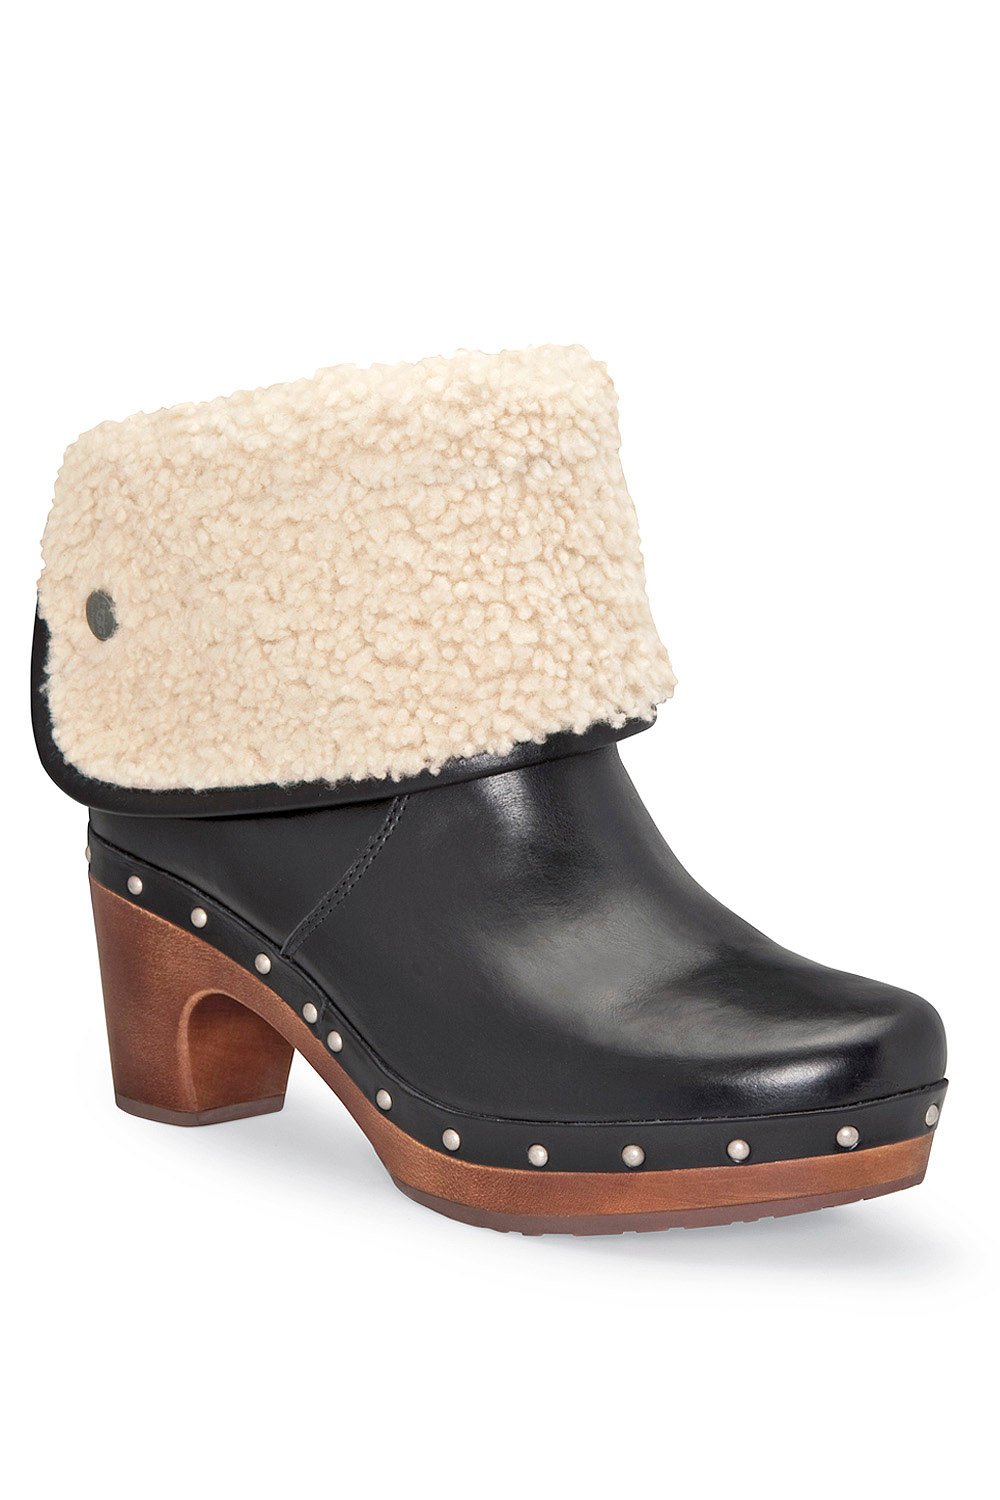 ugg clogs boots